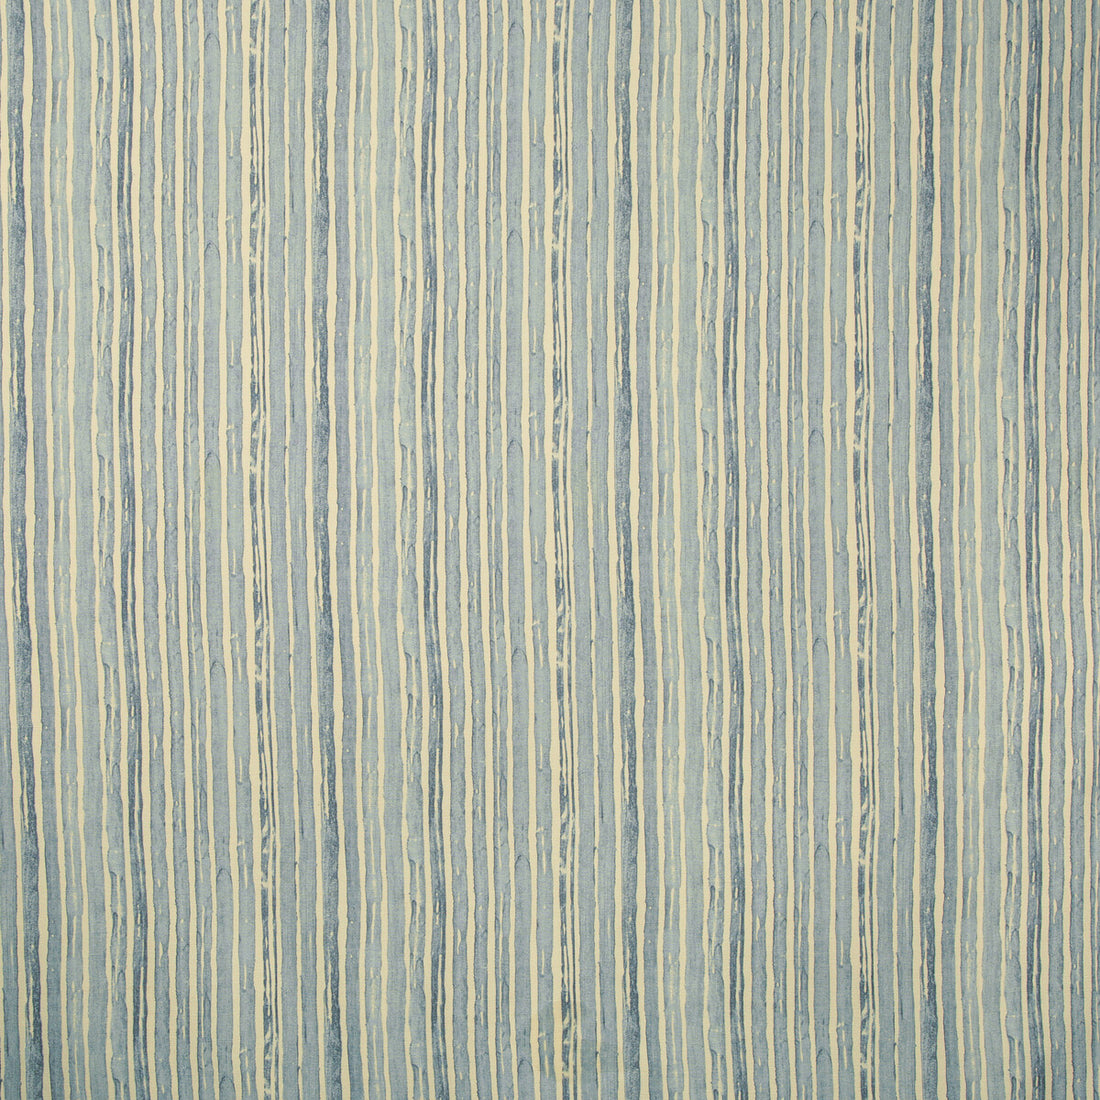 Benson Stripe fabric in faded denim color - pattern 2019151.15.0 - by Lee Jofa in the Carrier And Company collection